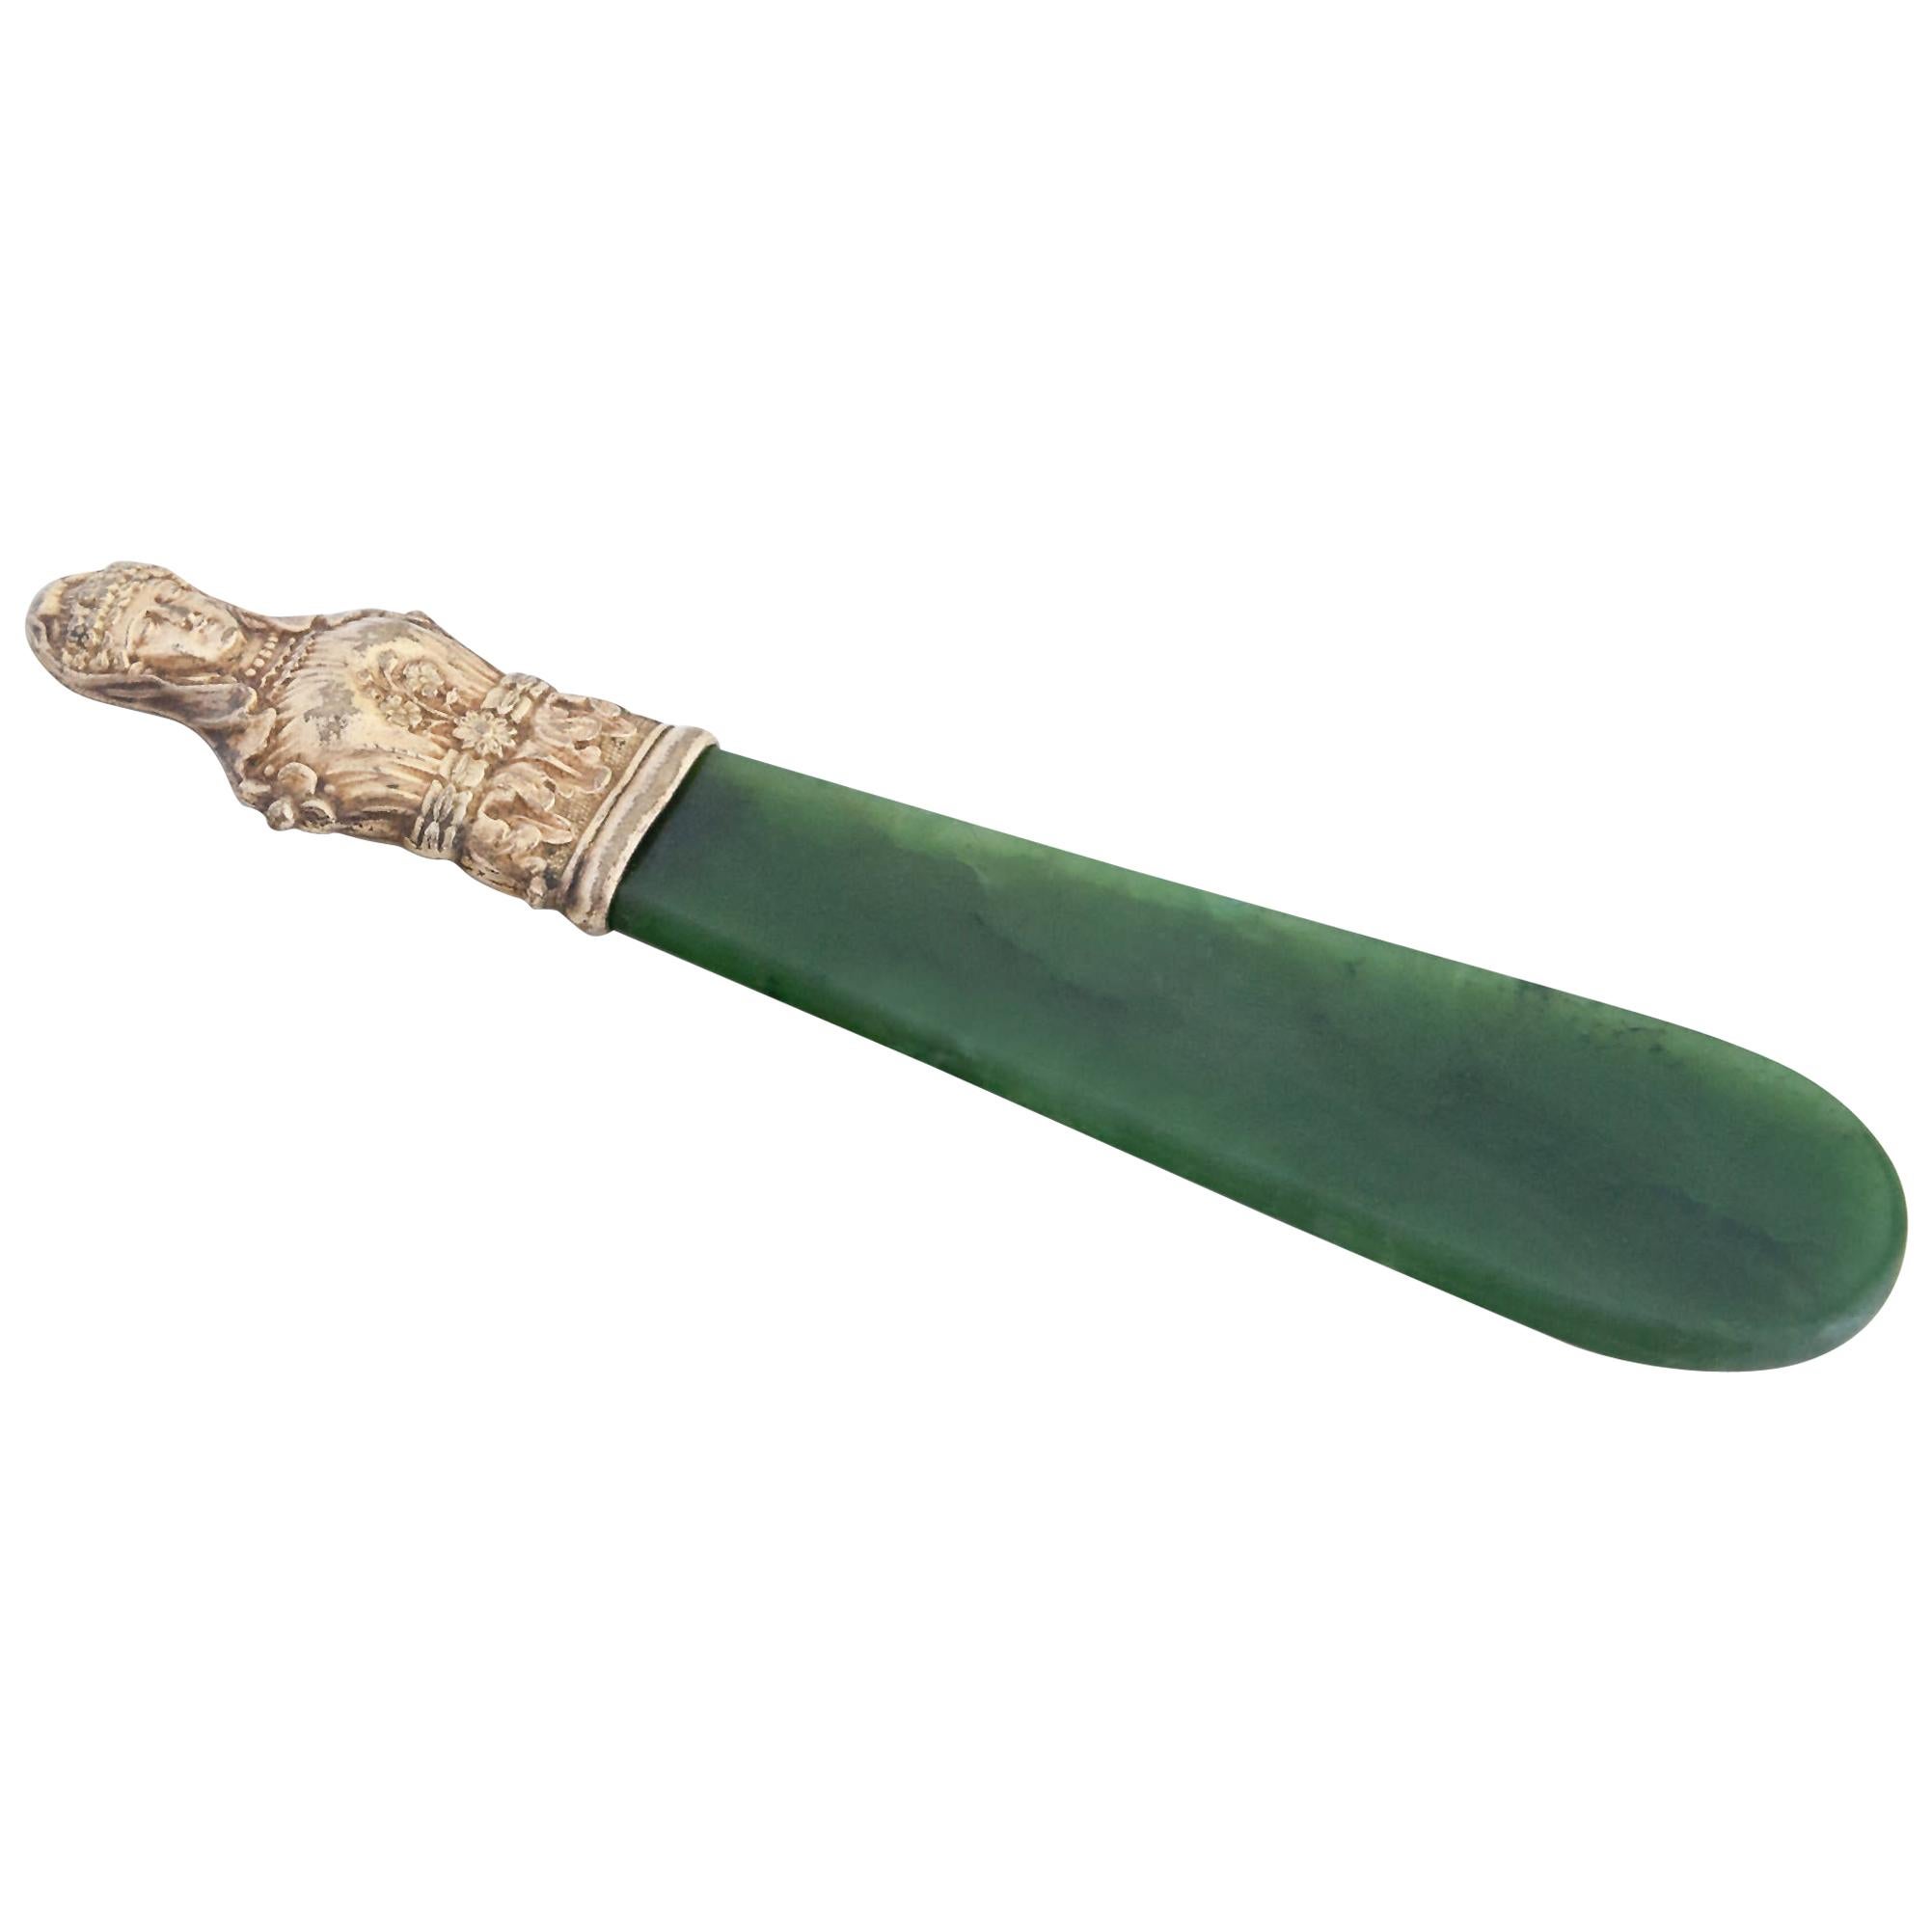 Nephrite Caviar Knife, Probably, Russia, First Half of the 19th Century